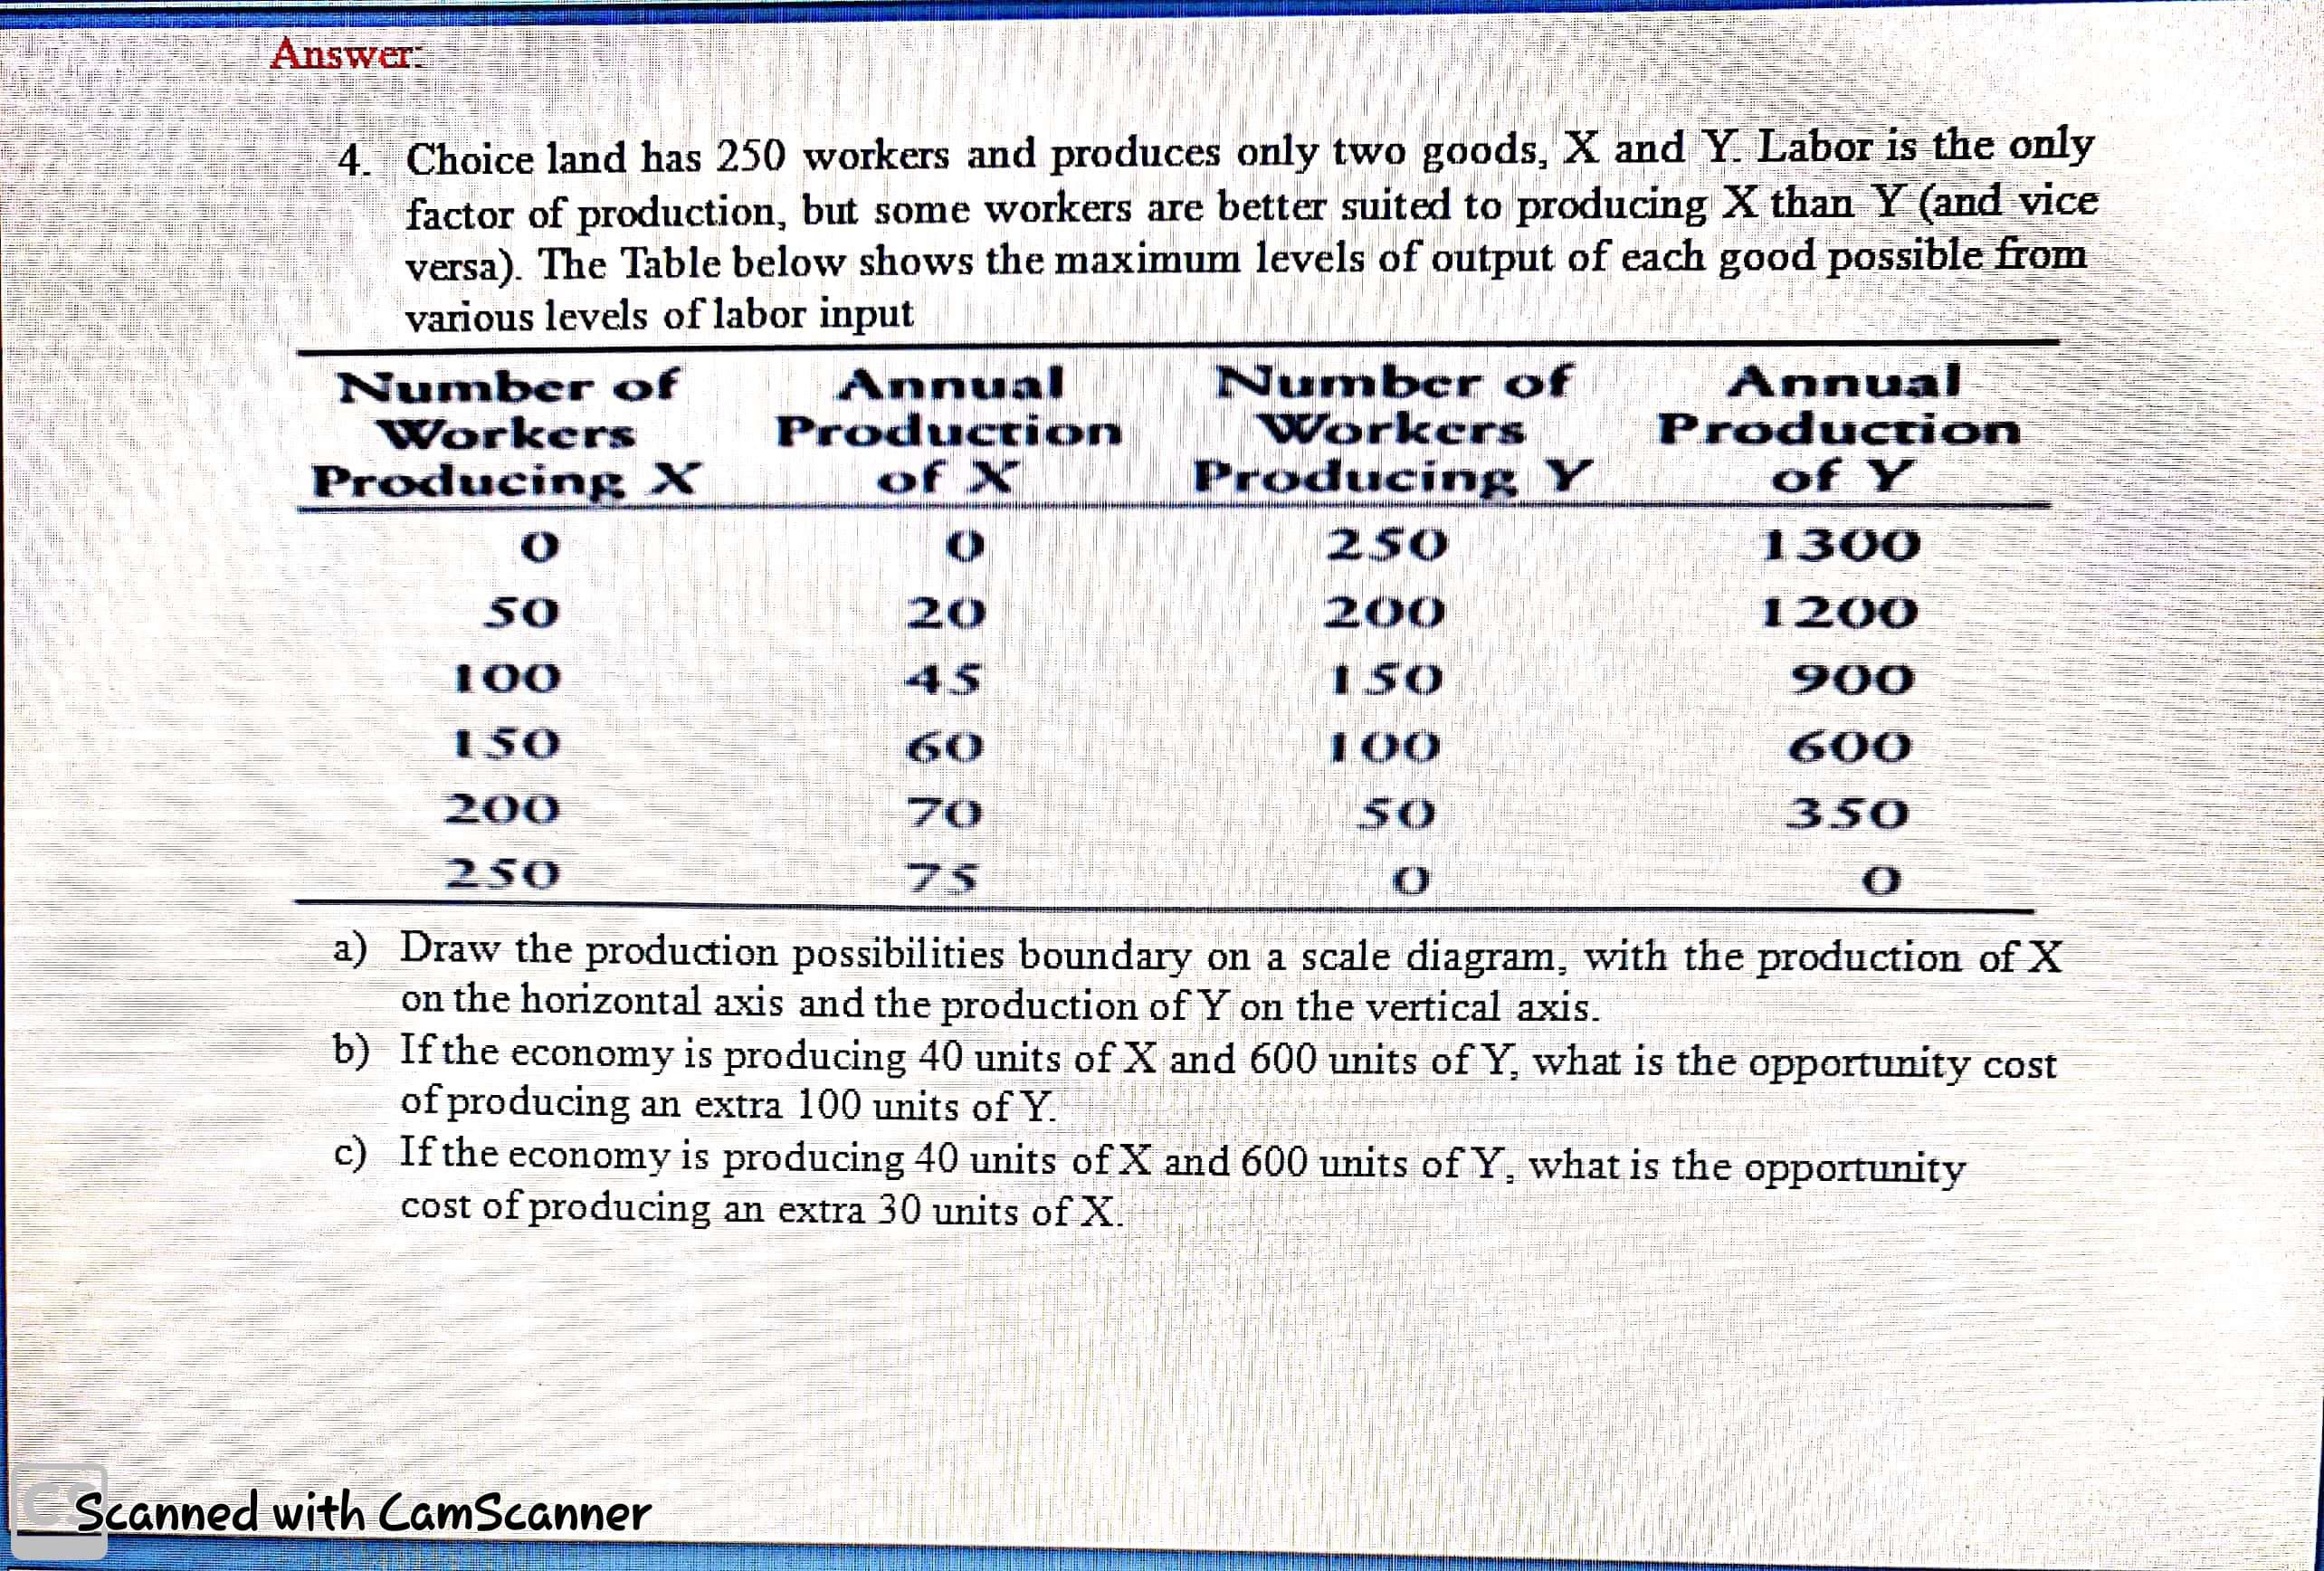 4. Choice land has 250 workers and produces only two goods, X and Y. Labor is-the only
factor of production, but some workers are better suited to producing X than Y (andvice
versa). The Table below shows the maximum levels of output of each good possible from
various levels of labor input
Number of
Workers
Producing X
Annual
Production
of X
Number of
Workers
Producing Ý
Annual
Production
of Y
250
1300
50
20
200
1200
100
45
150
900
150
60
100
600
200
350
250
75
a) Draw the production possibilities boundary on a scale diagram, with the production of X
on the horizontal axis and the production of Y on the vertical axis.
b) Ifthe economy is producing 40 units of X and 600 units of Y, what is the opportunity cost
of producing an extra 100 units of Y.
c) Ifthe economy is producing 40 units of X and 600 units of Y, wvhat is the opportunity
cost of producing an extra 30 units of X.
